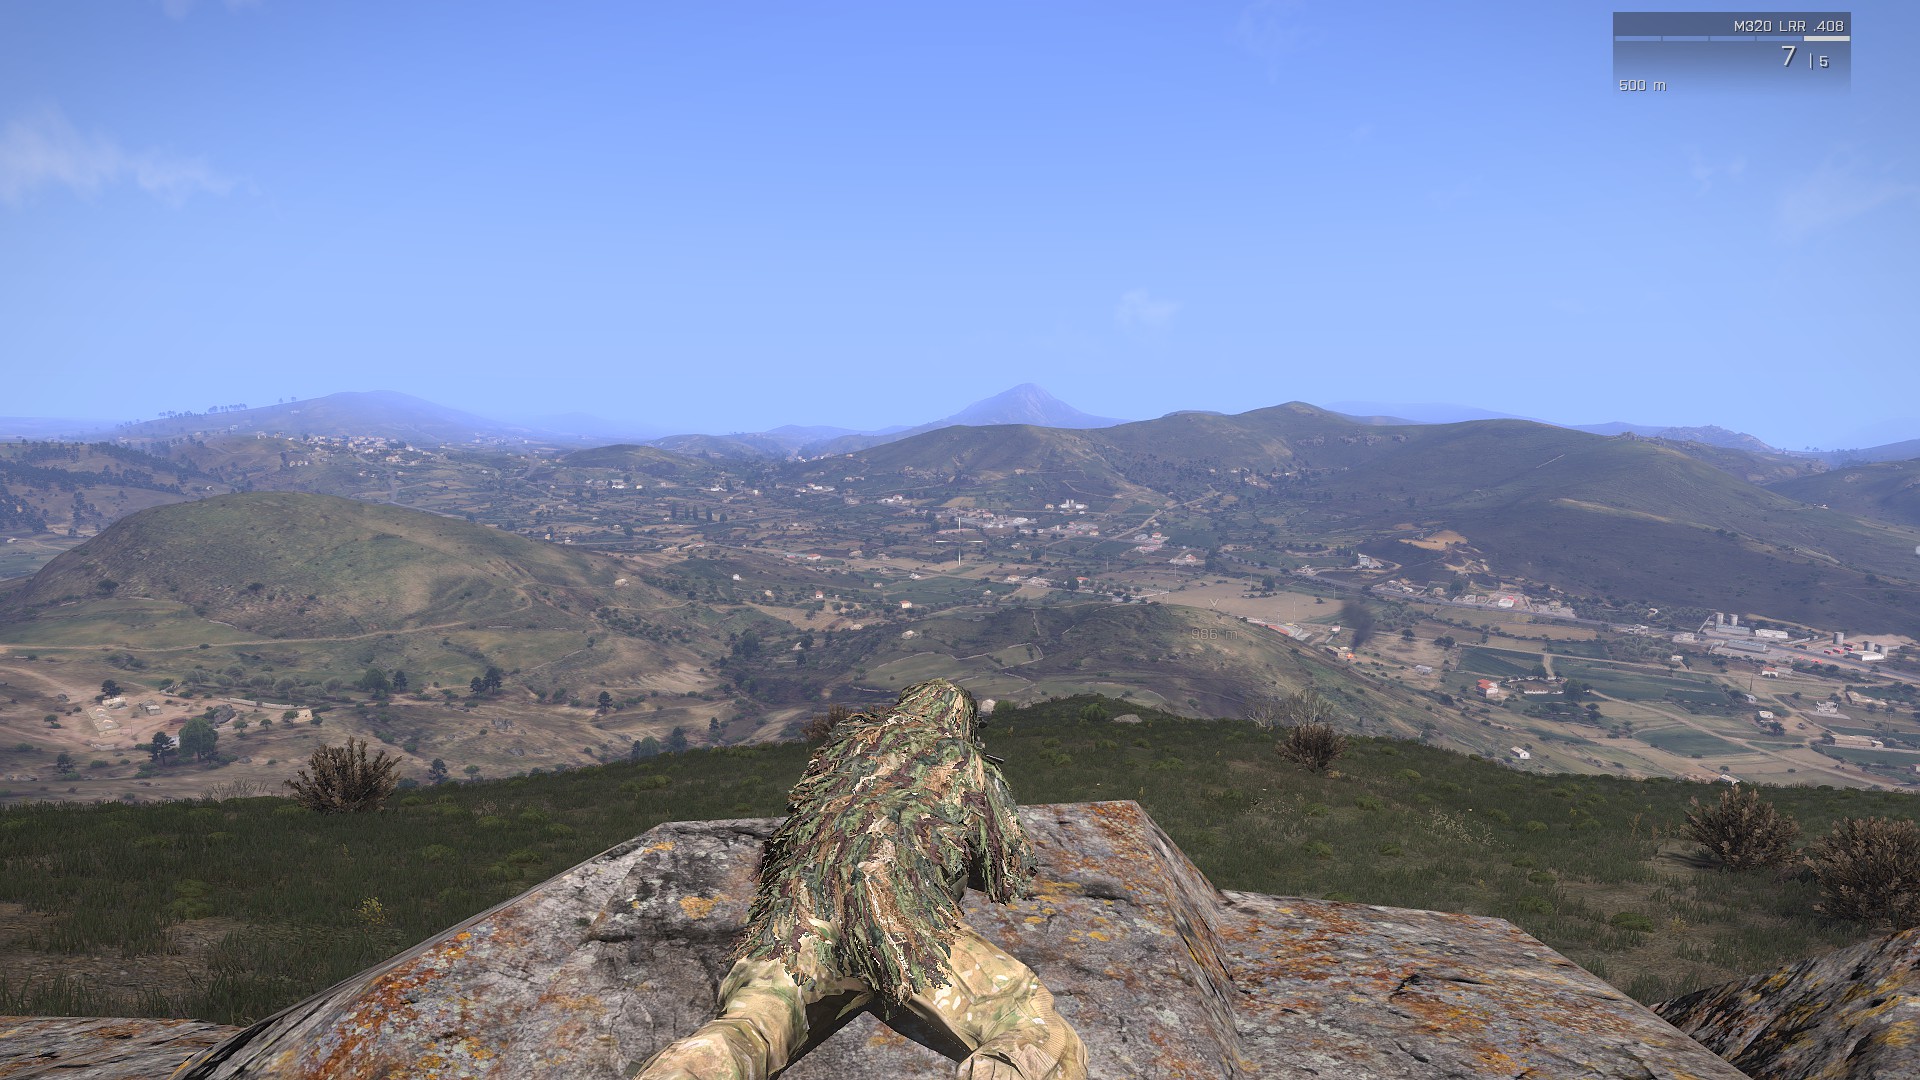 Play Arma 3 for Free This Weekend - GameSpot